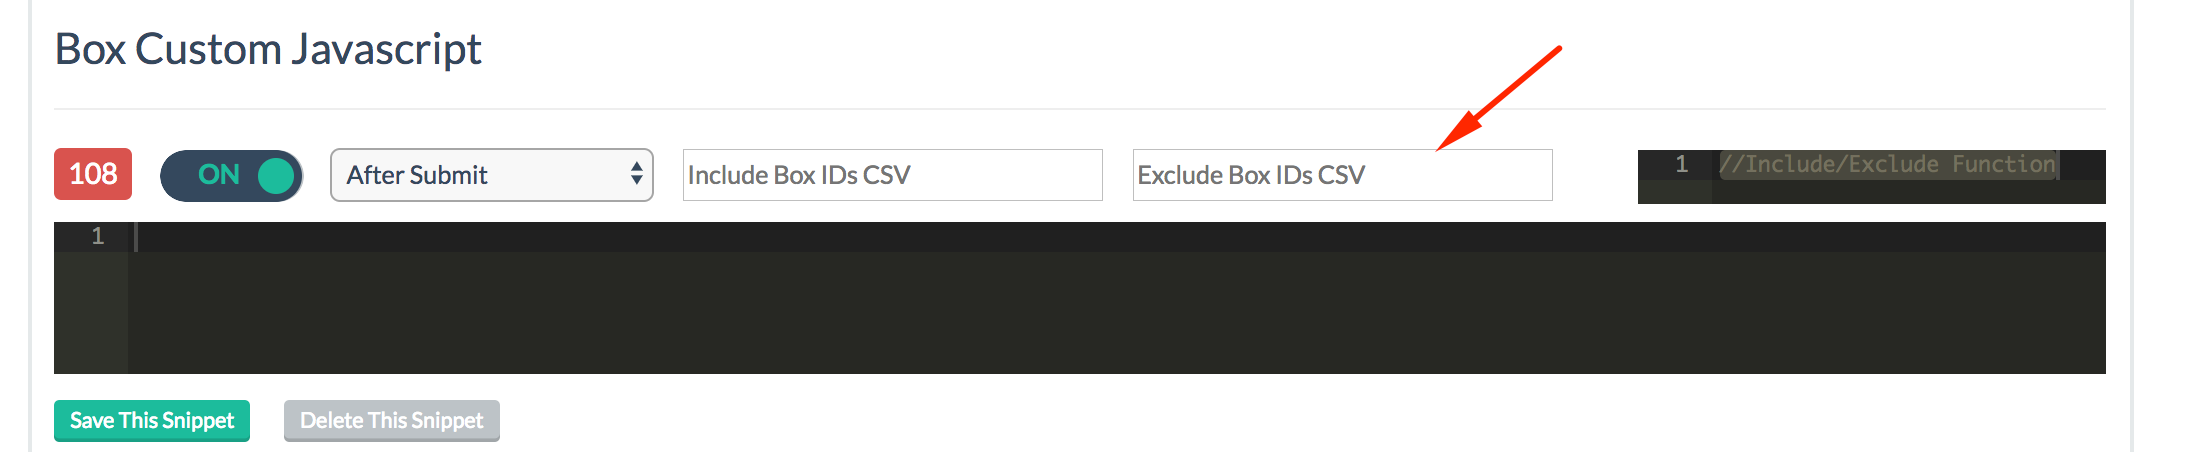 exclude box IDs for custom javascript